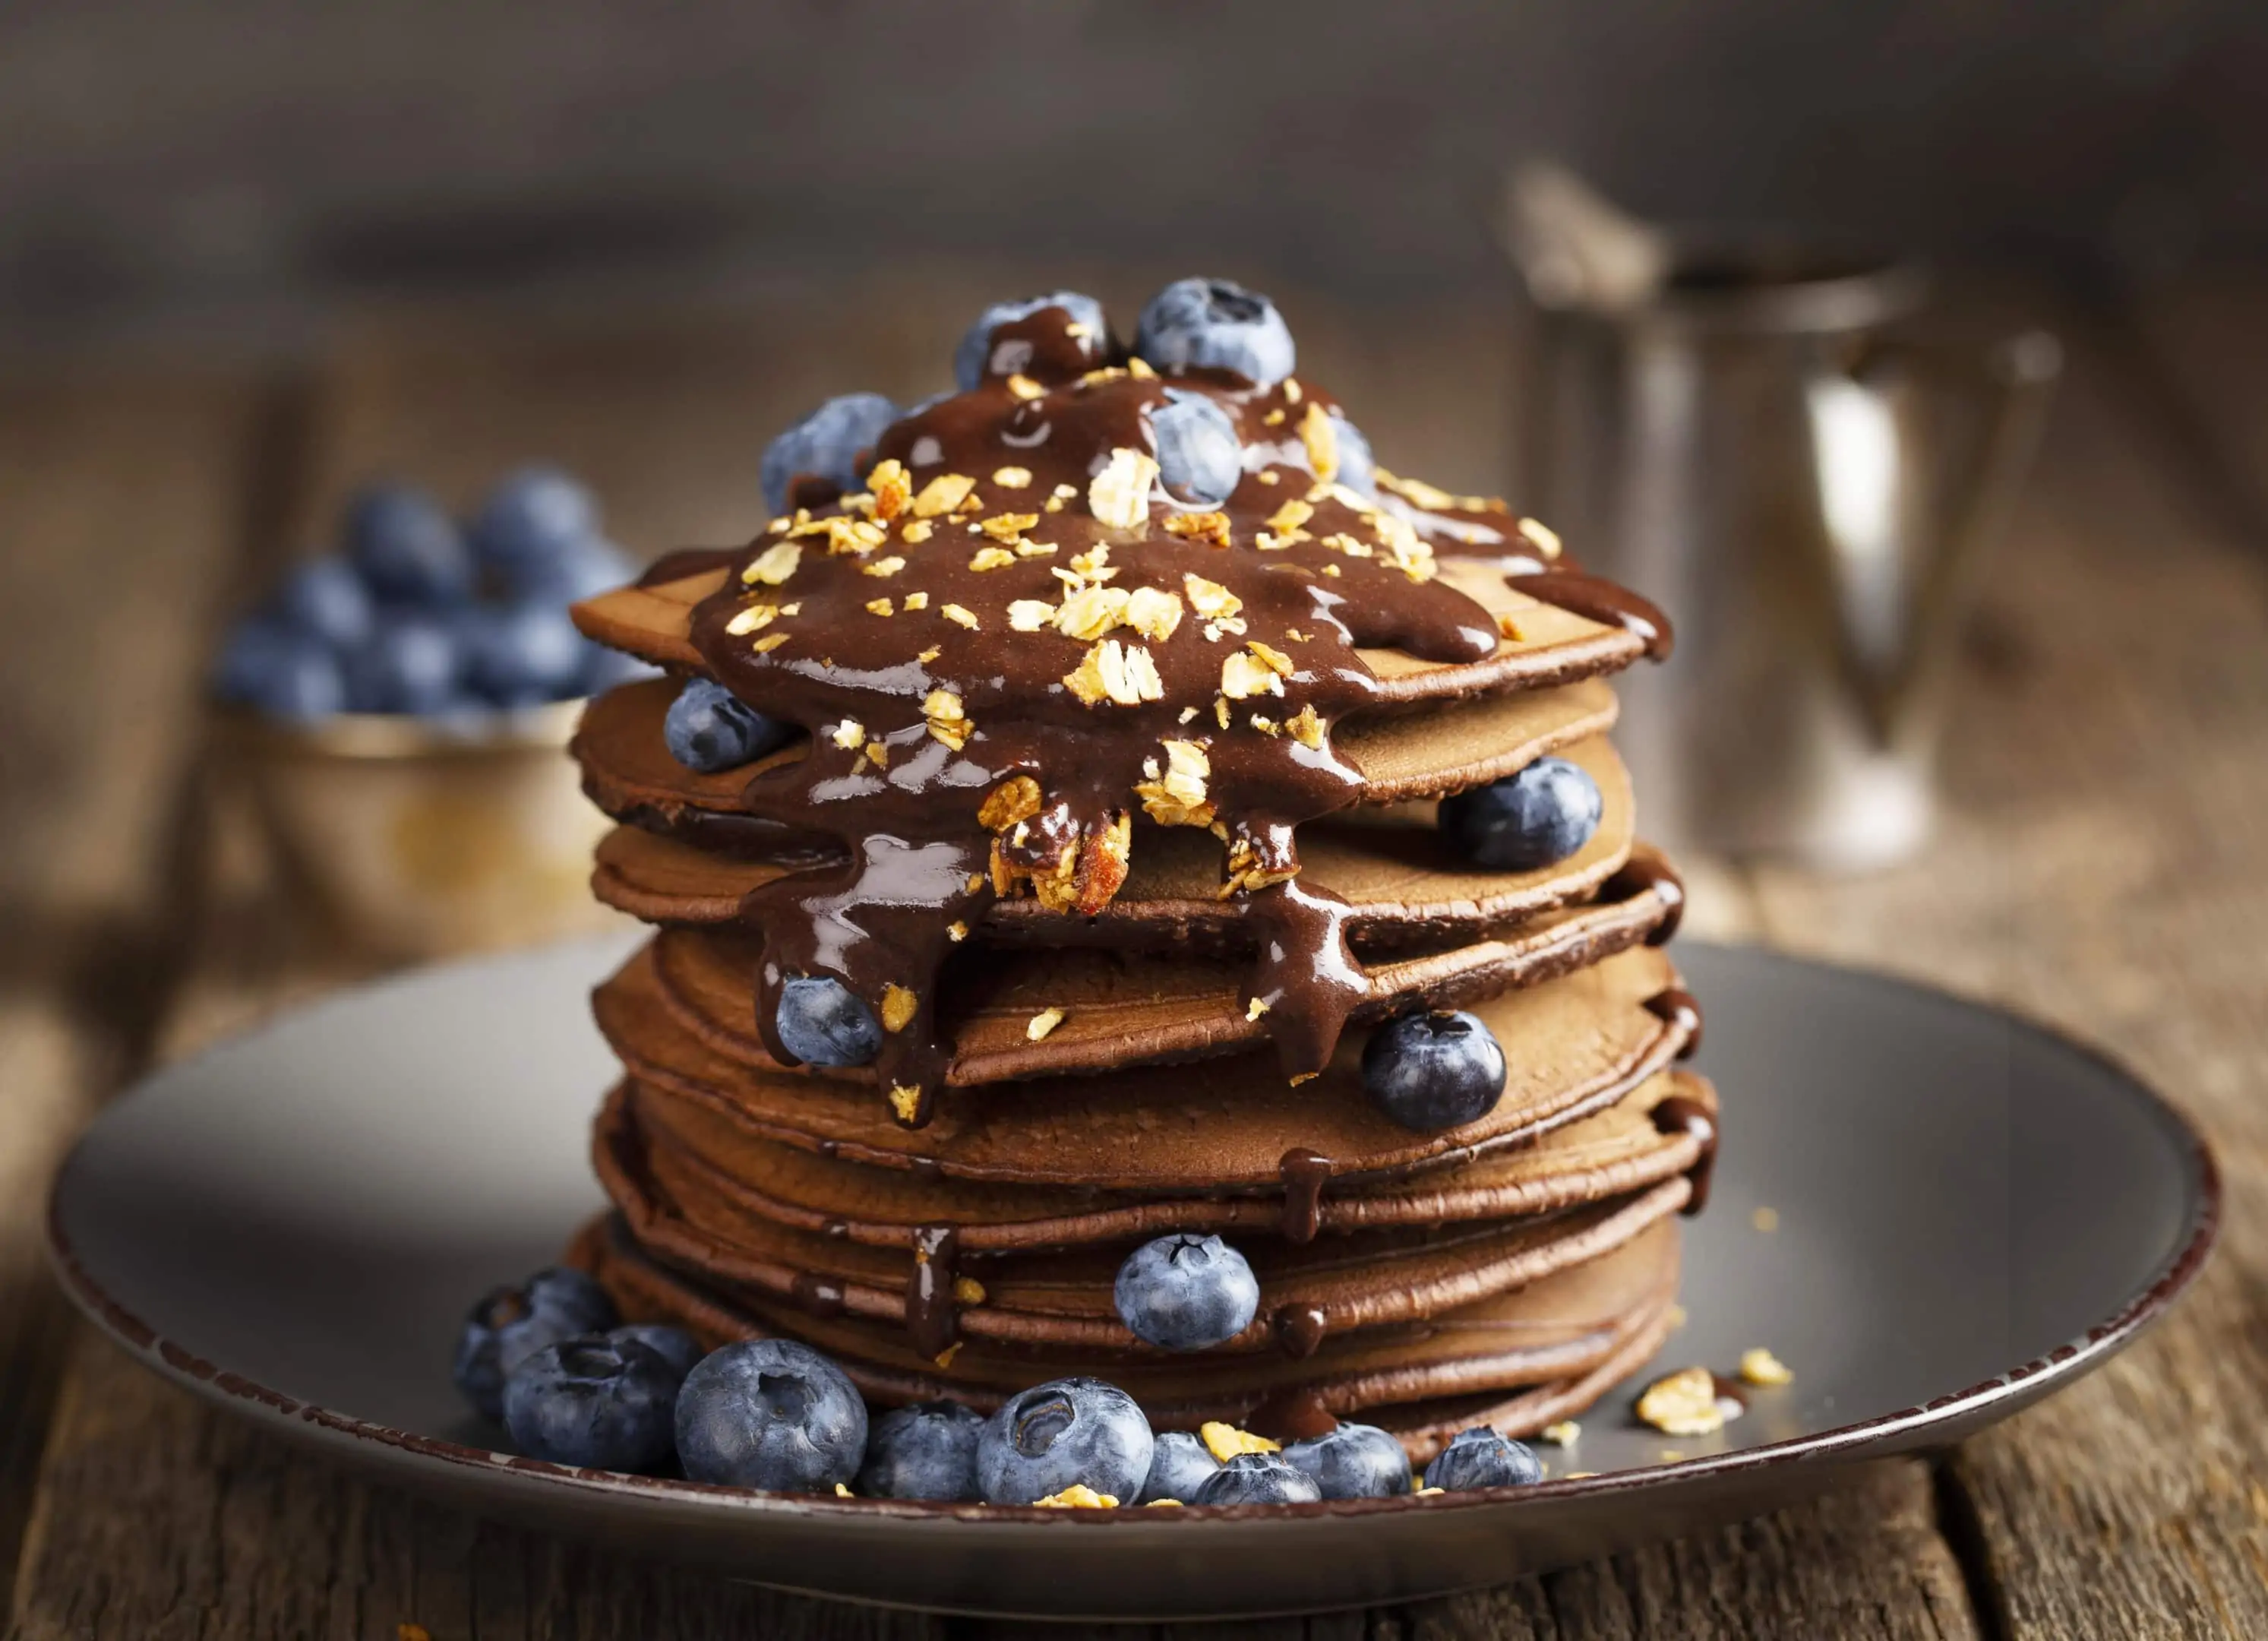 Oat flour pancakes tower with melted chocolate and blueberries